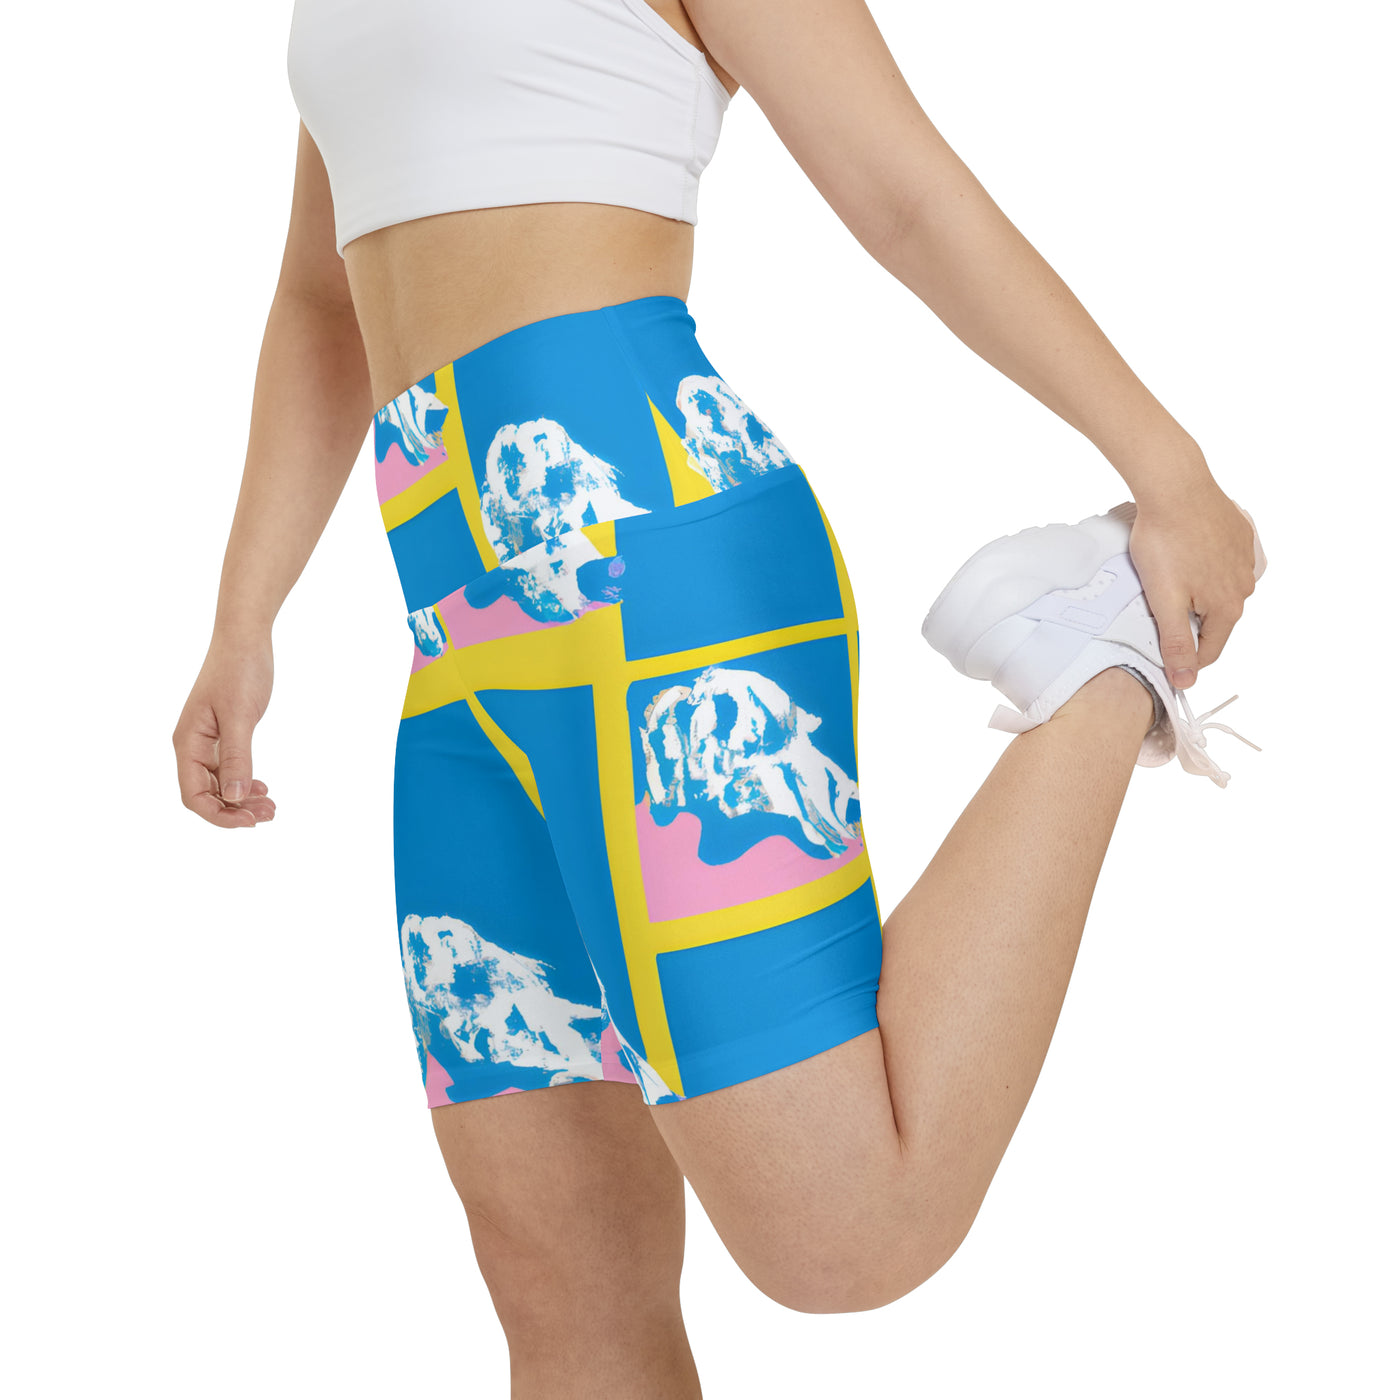 "Furrever Friends - A Celebration of Fun Doggy Adventures Women's Workout Shorts